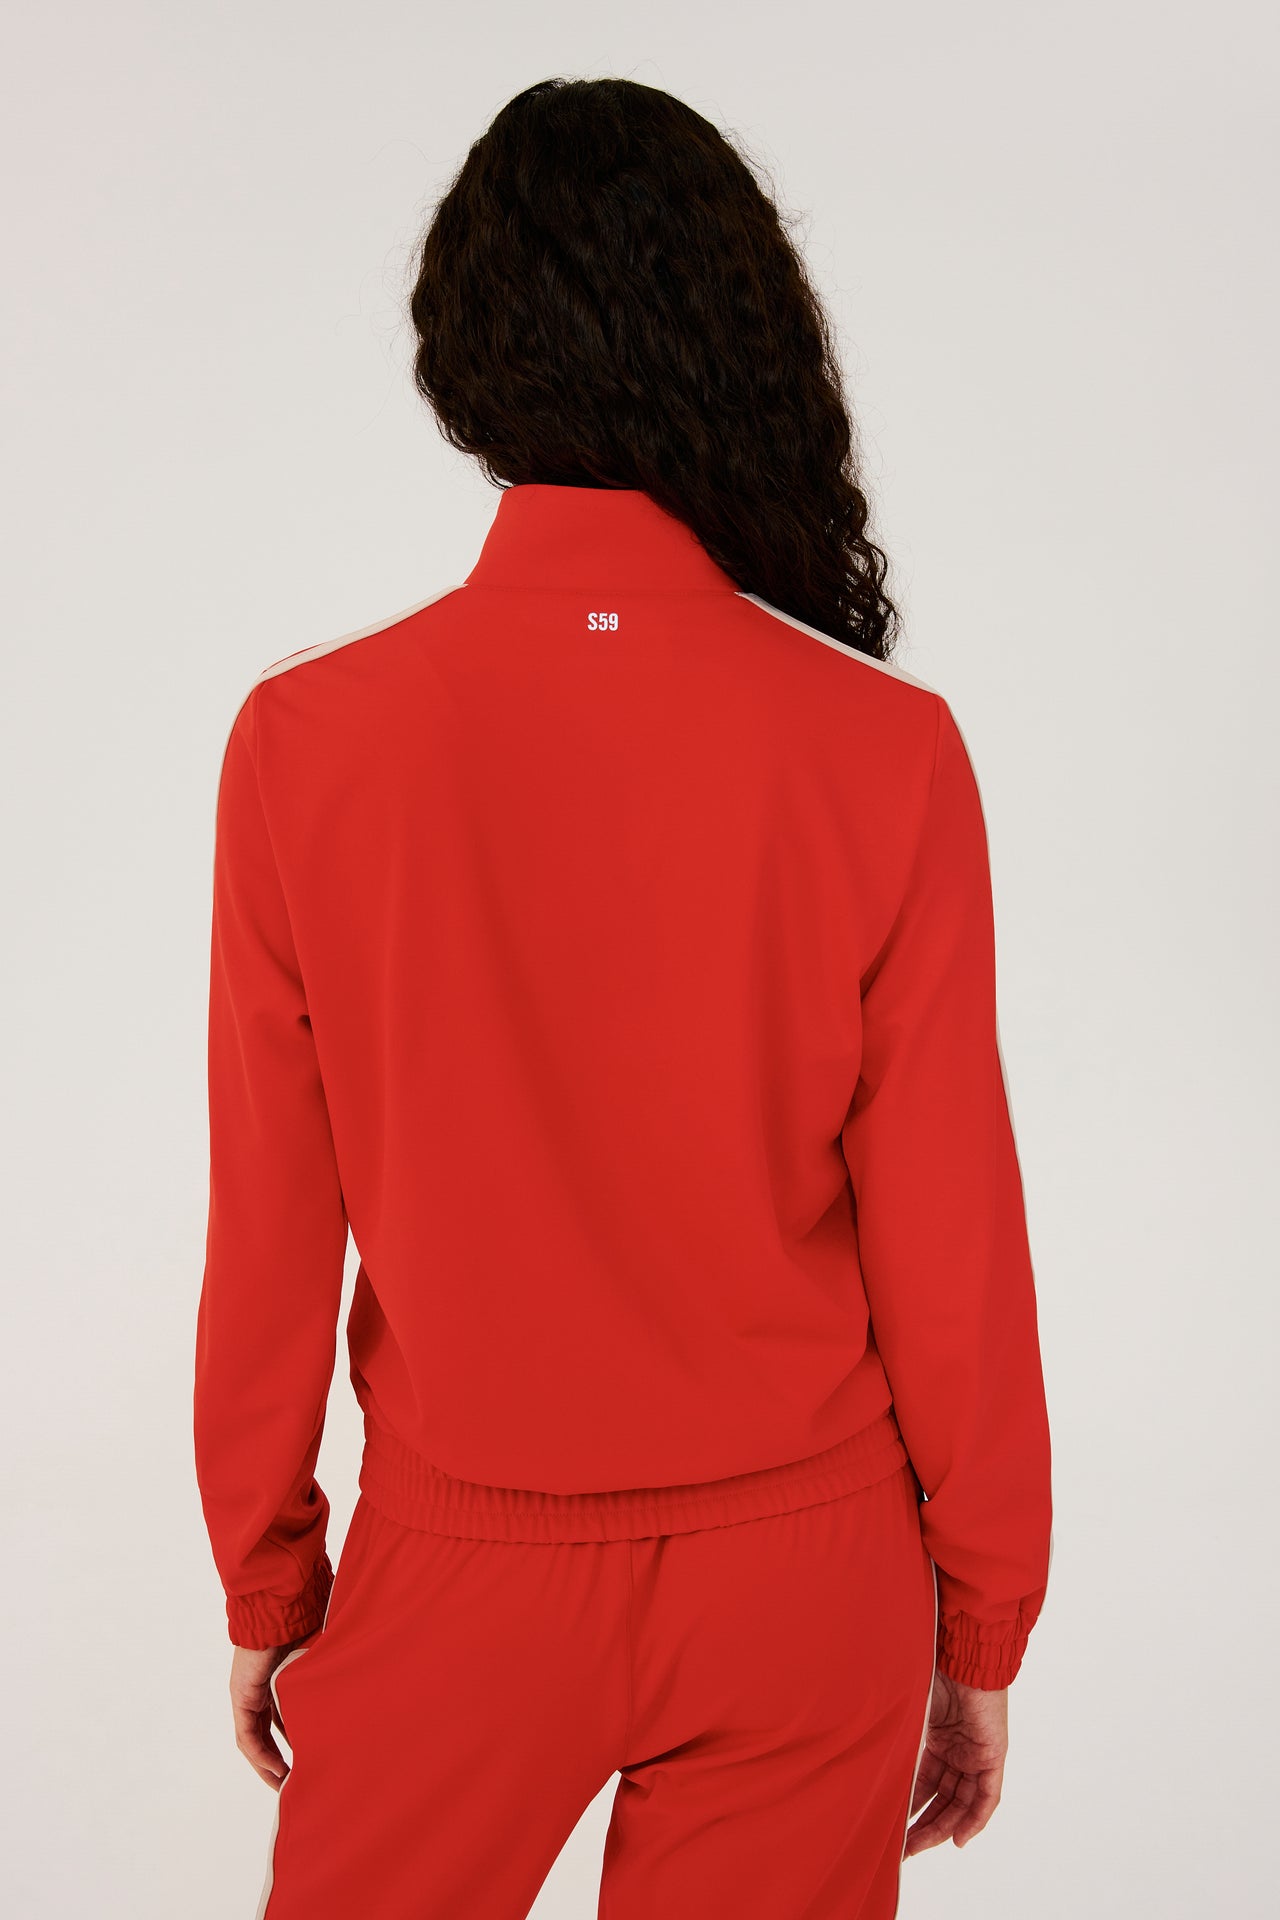 Back view of girl wearing red zip jacket that stops under chin with two white stripes down the side and a black zipper in the front with a red sweatpants